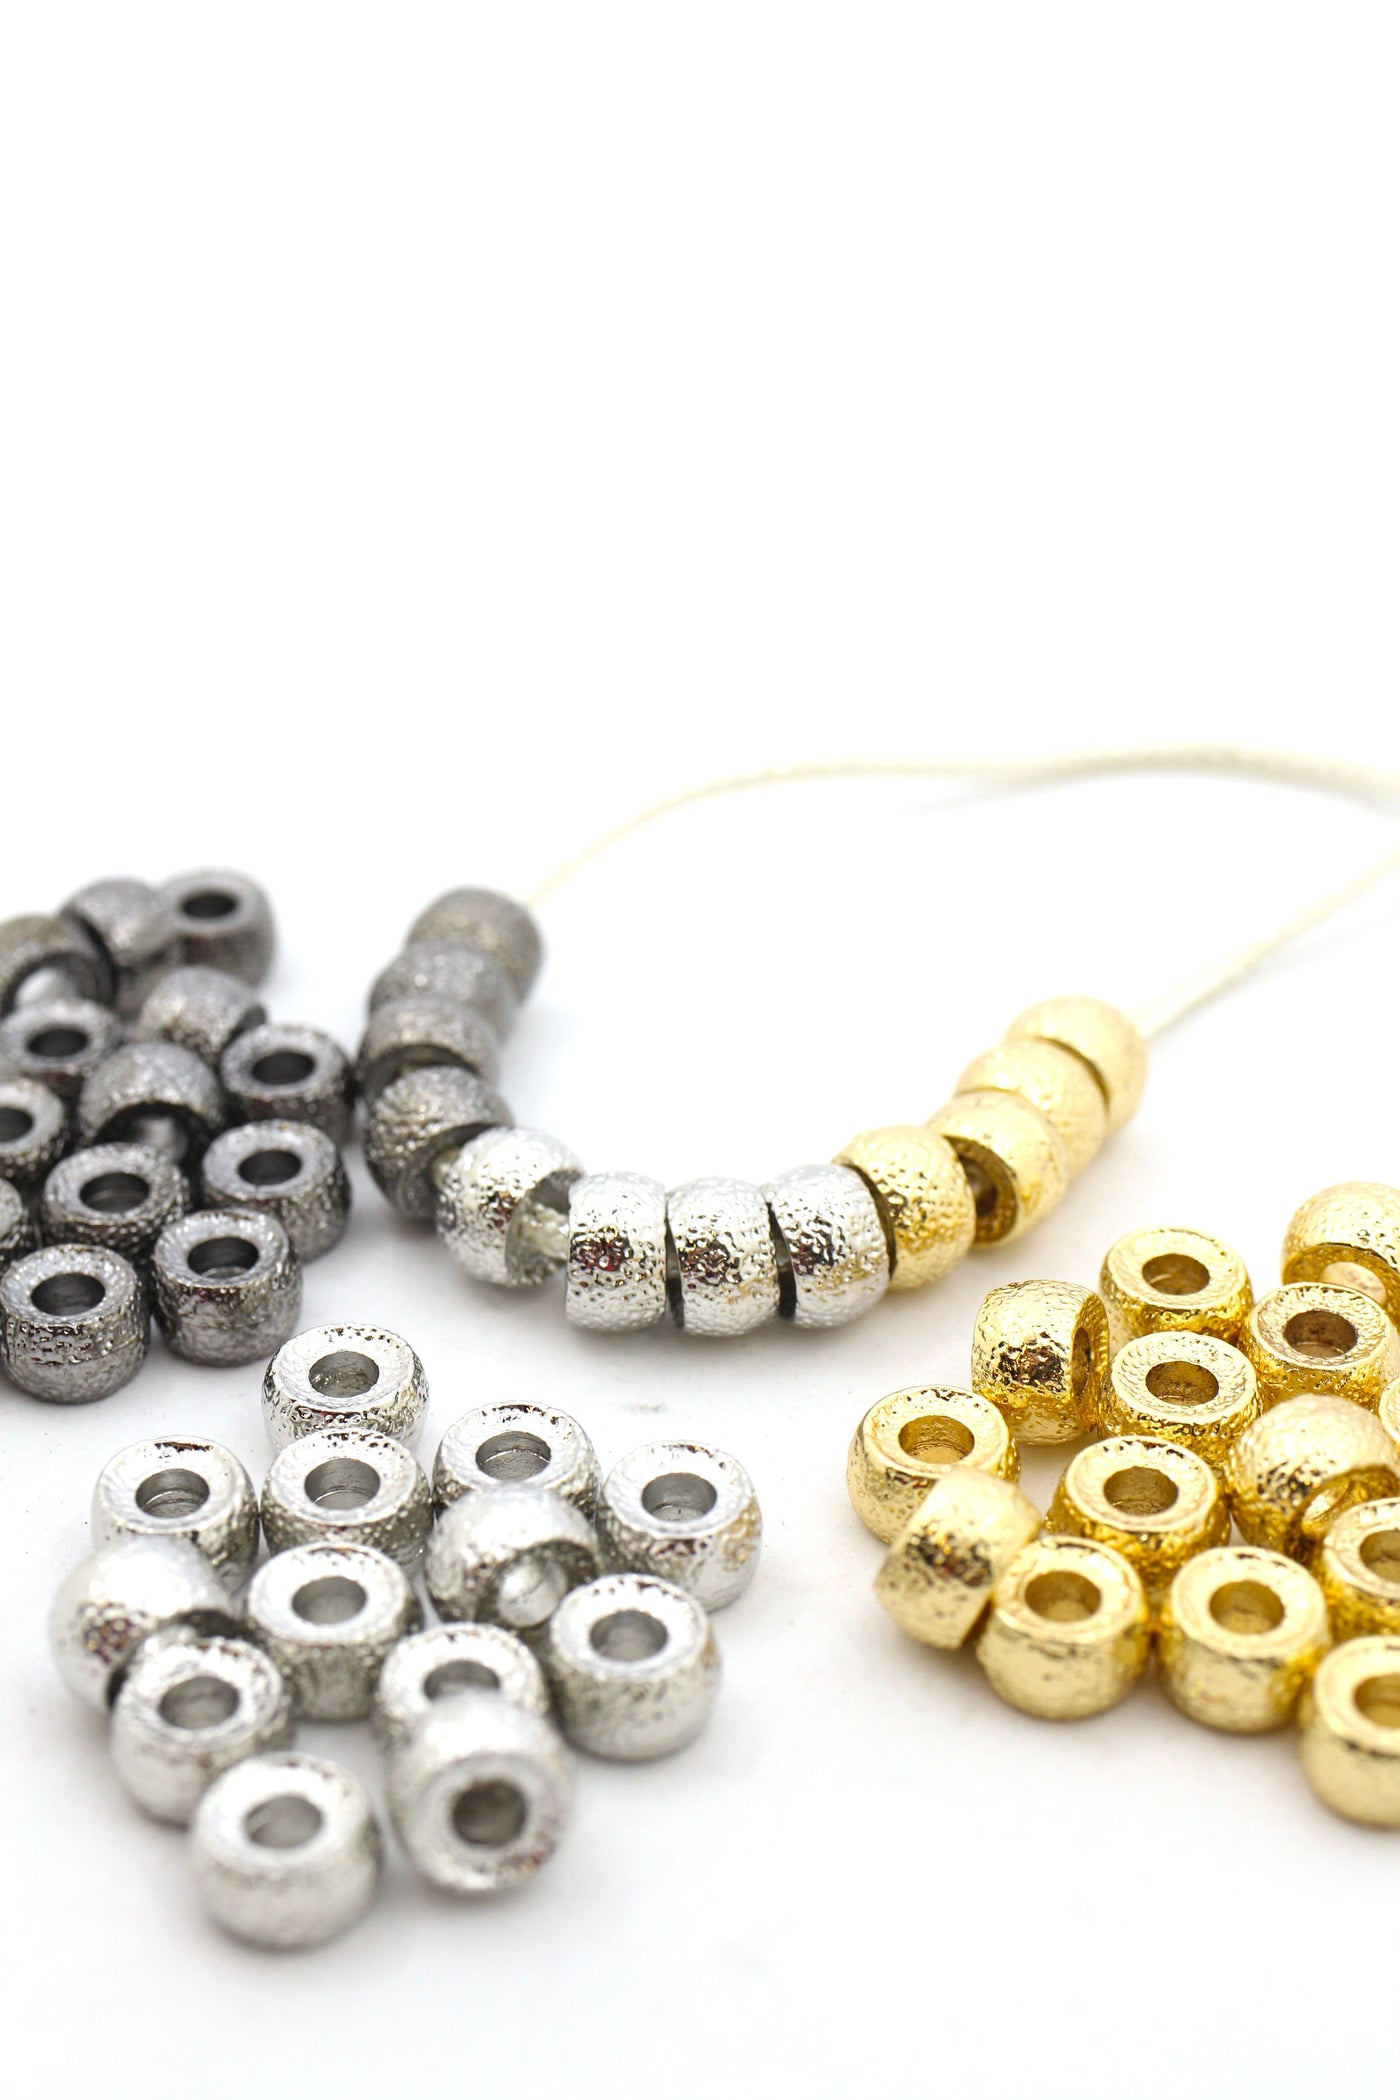 Textured Metal Pony Beads, Stardust Roller Beads, For Tie-On Bracelets